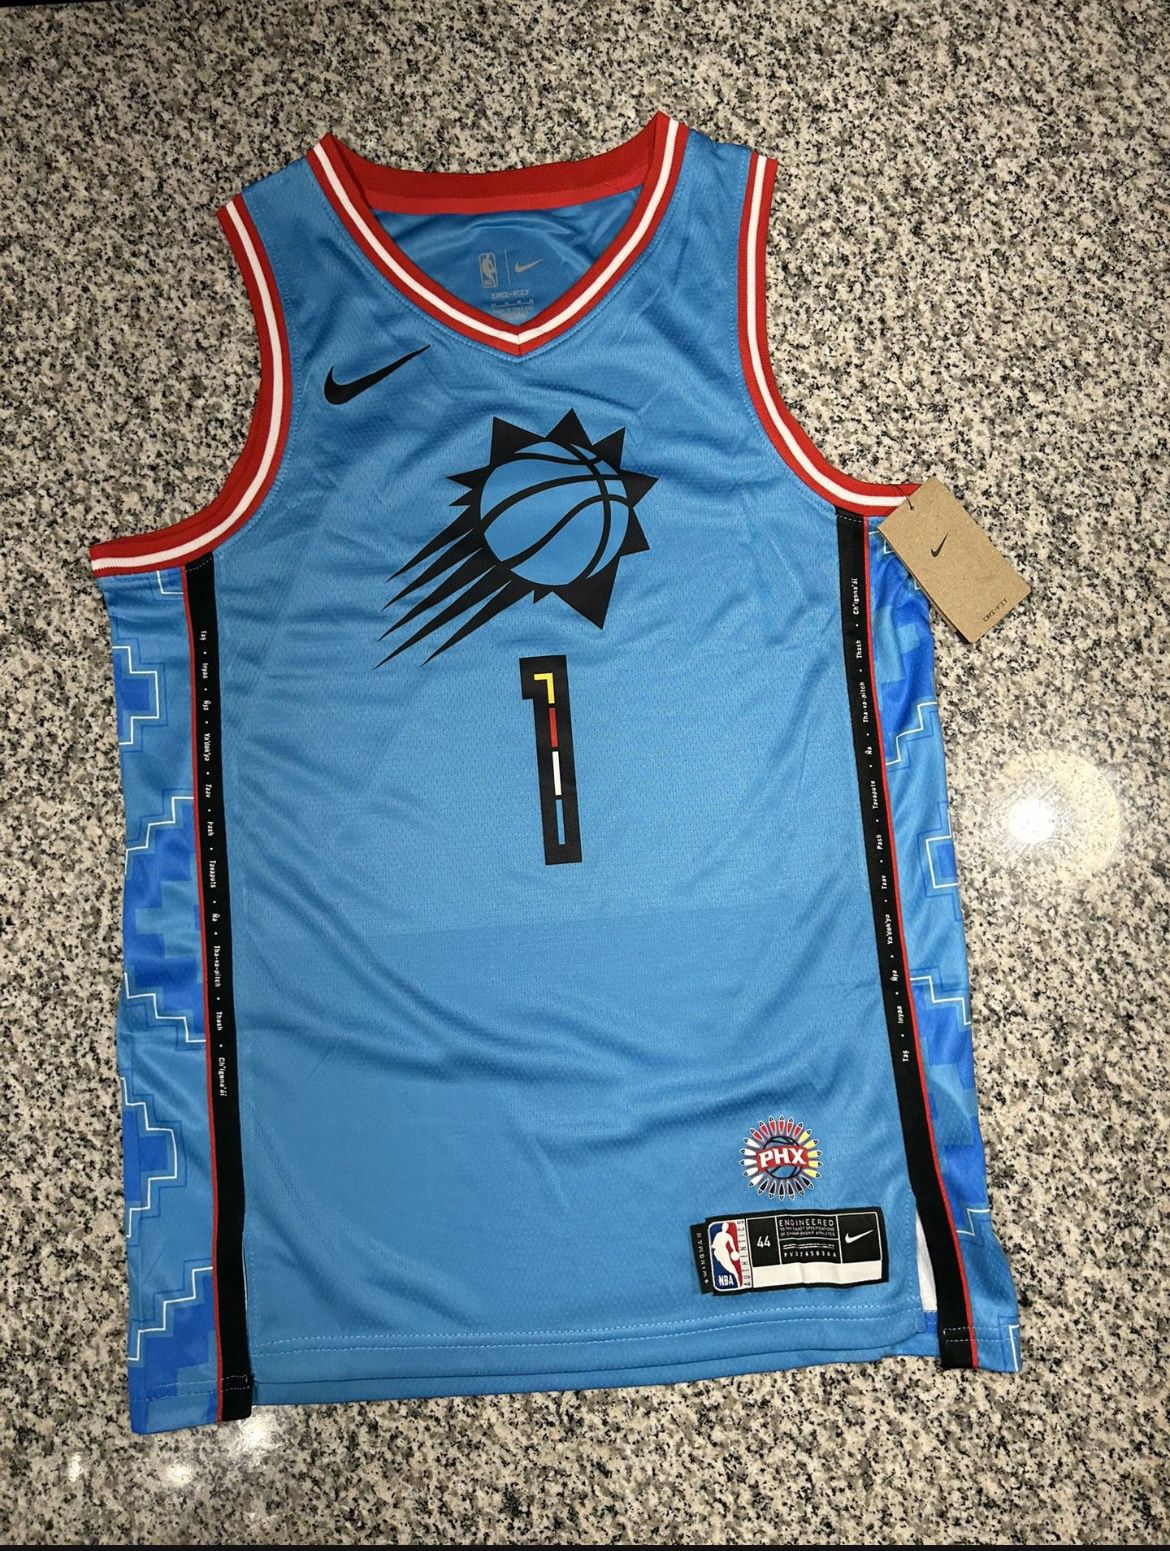 booker city edition jersey